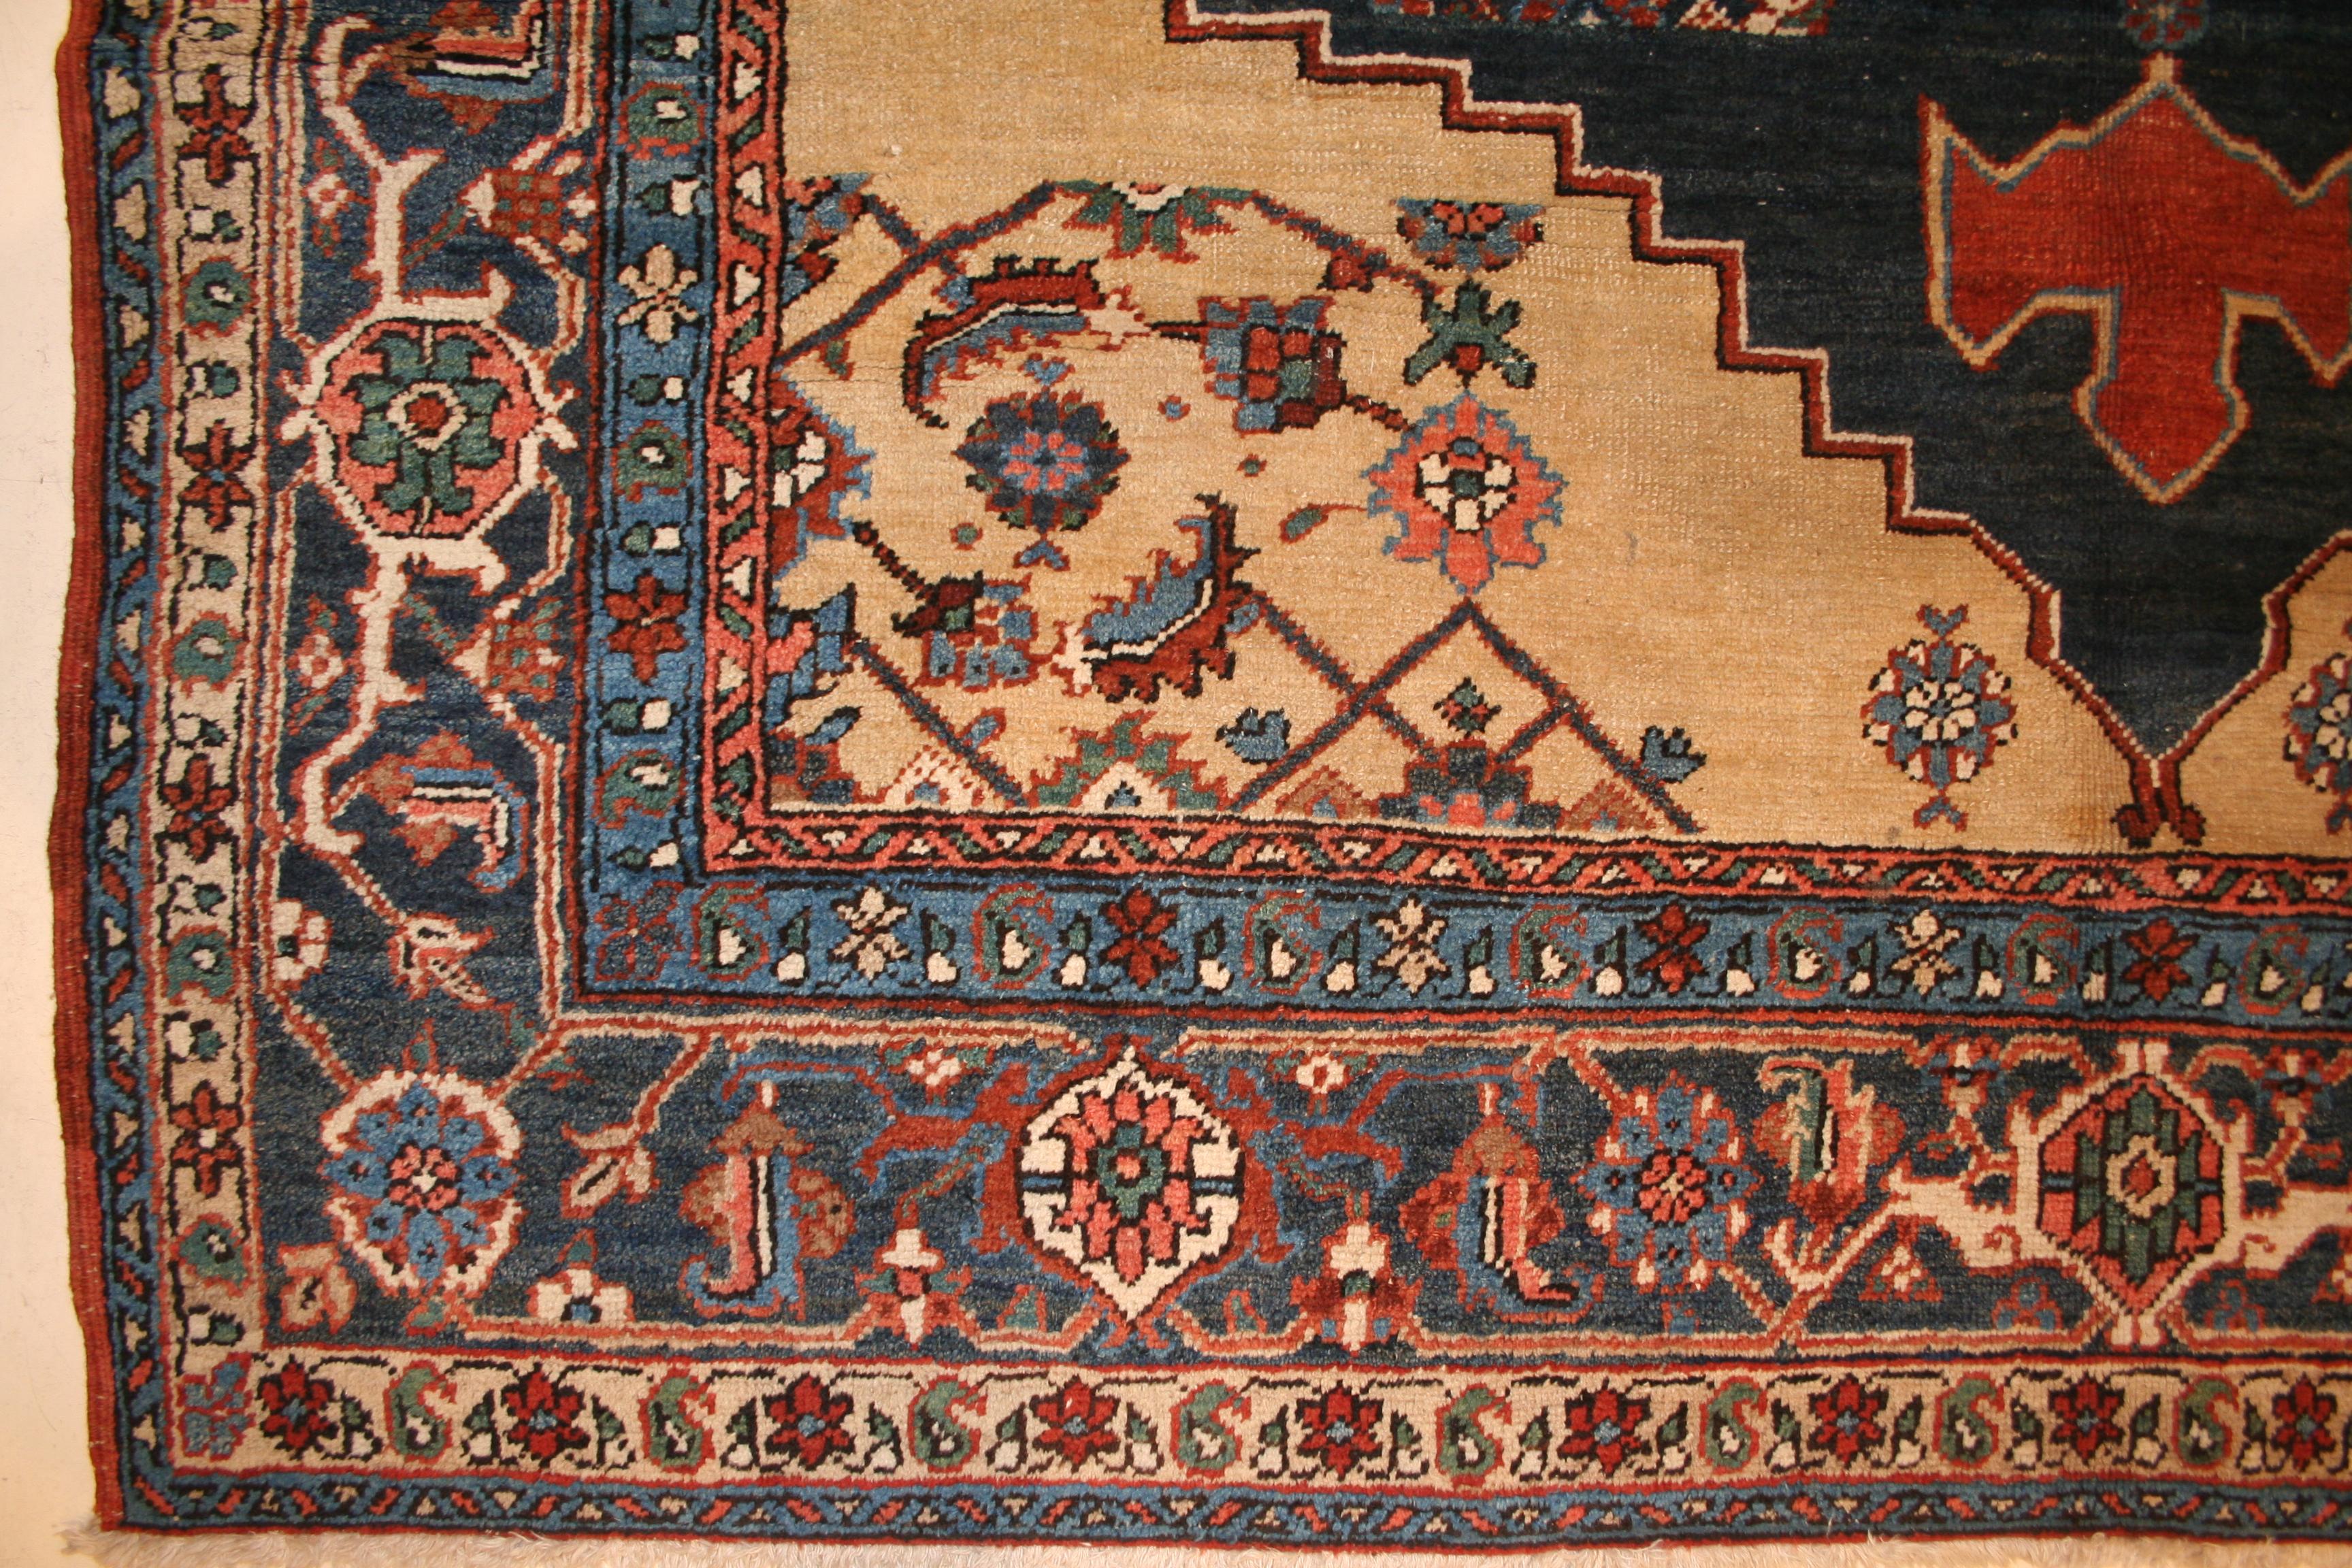 A very unusual Heriz rug, with a medallion design that is articulated in a way which indicates that it could quite possibly have been intended as a sampler (vaghireh). By weaving rugs of this type, individual mills would promote their ability in